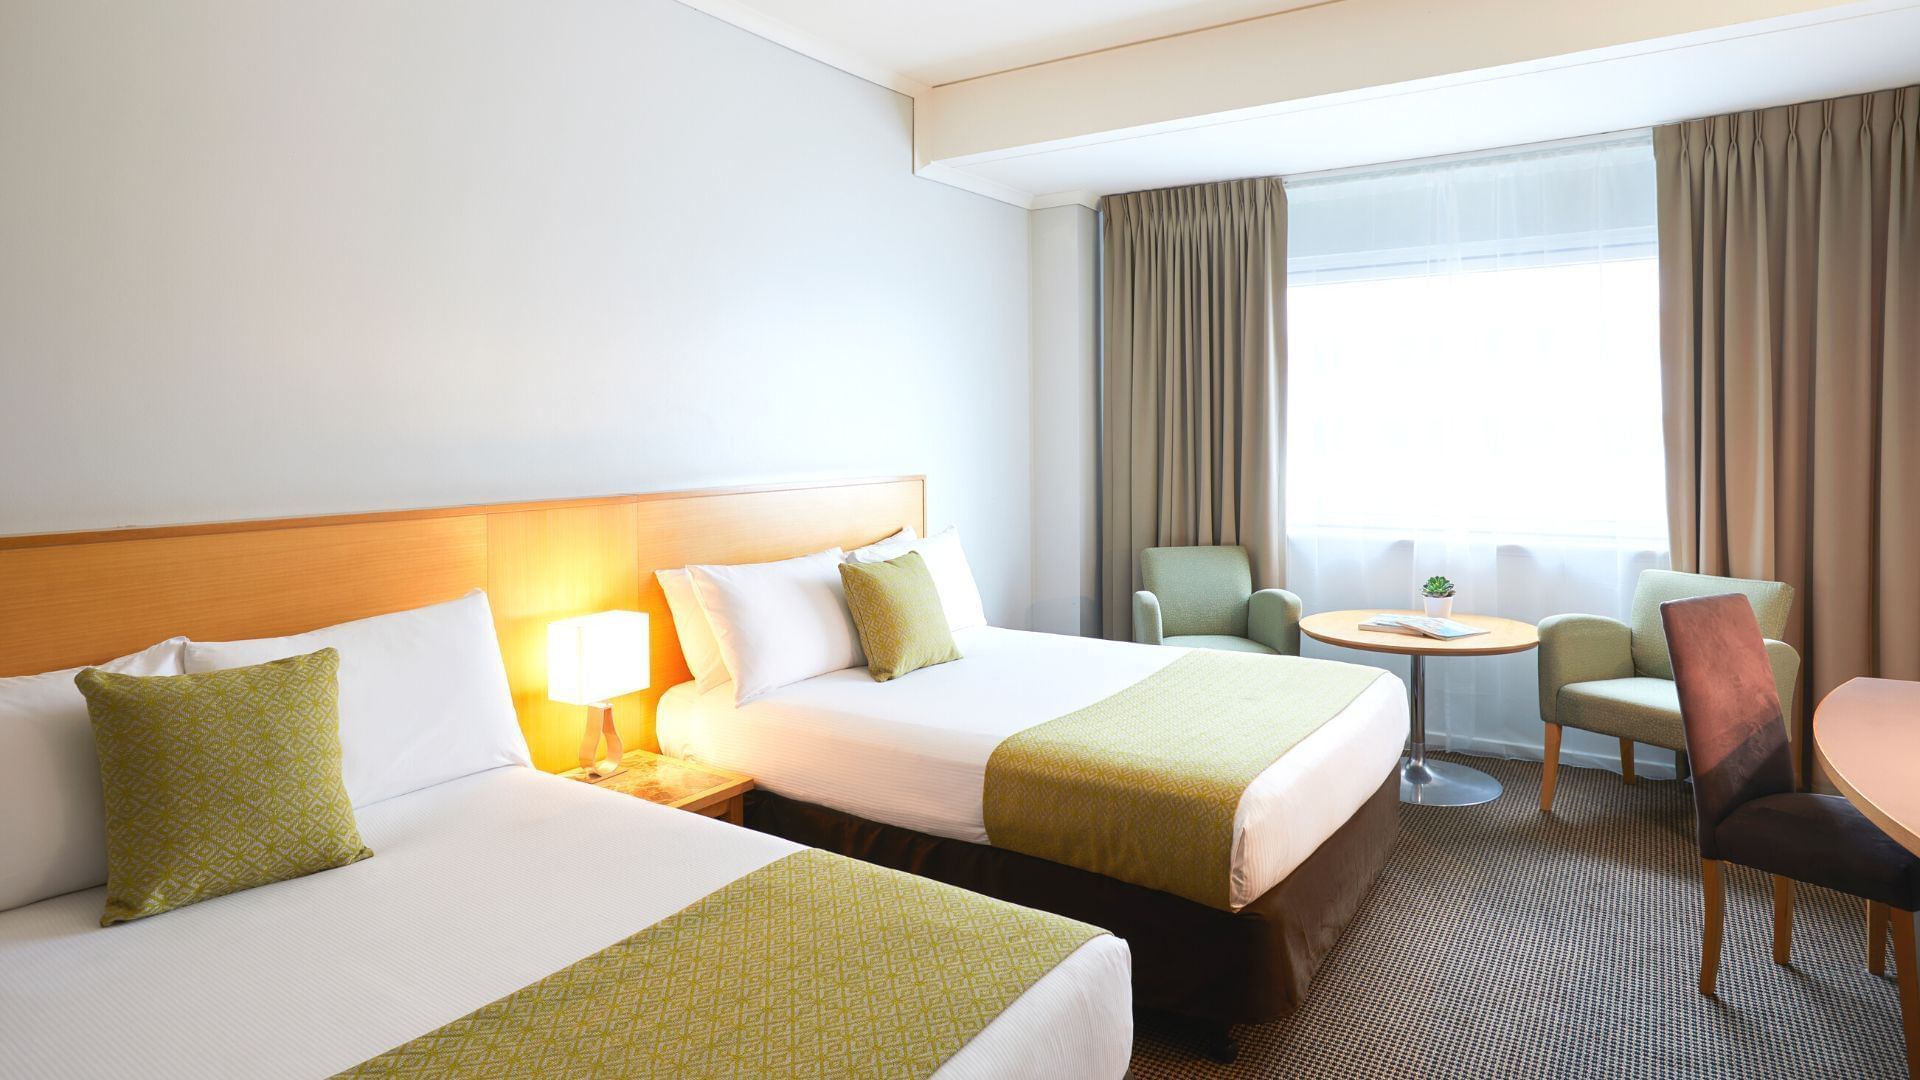 Standard Double Room | Perth Accommodation | Hotel Perth